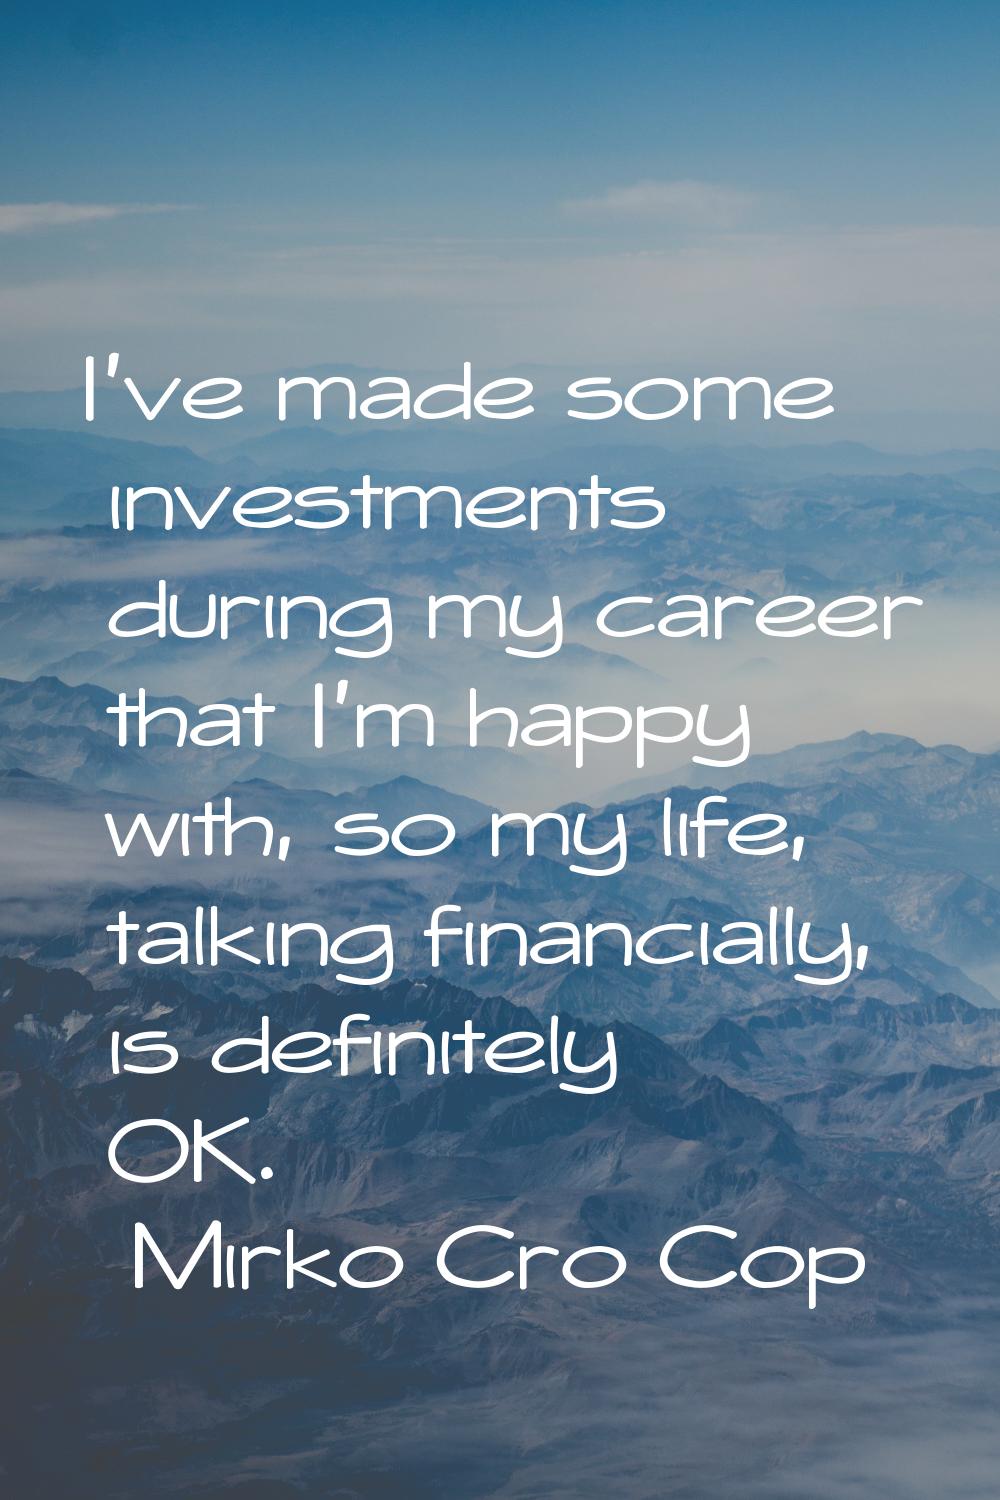 I've made some investments during my career that I'm happy with, so my life, talking financially, i